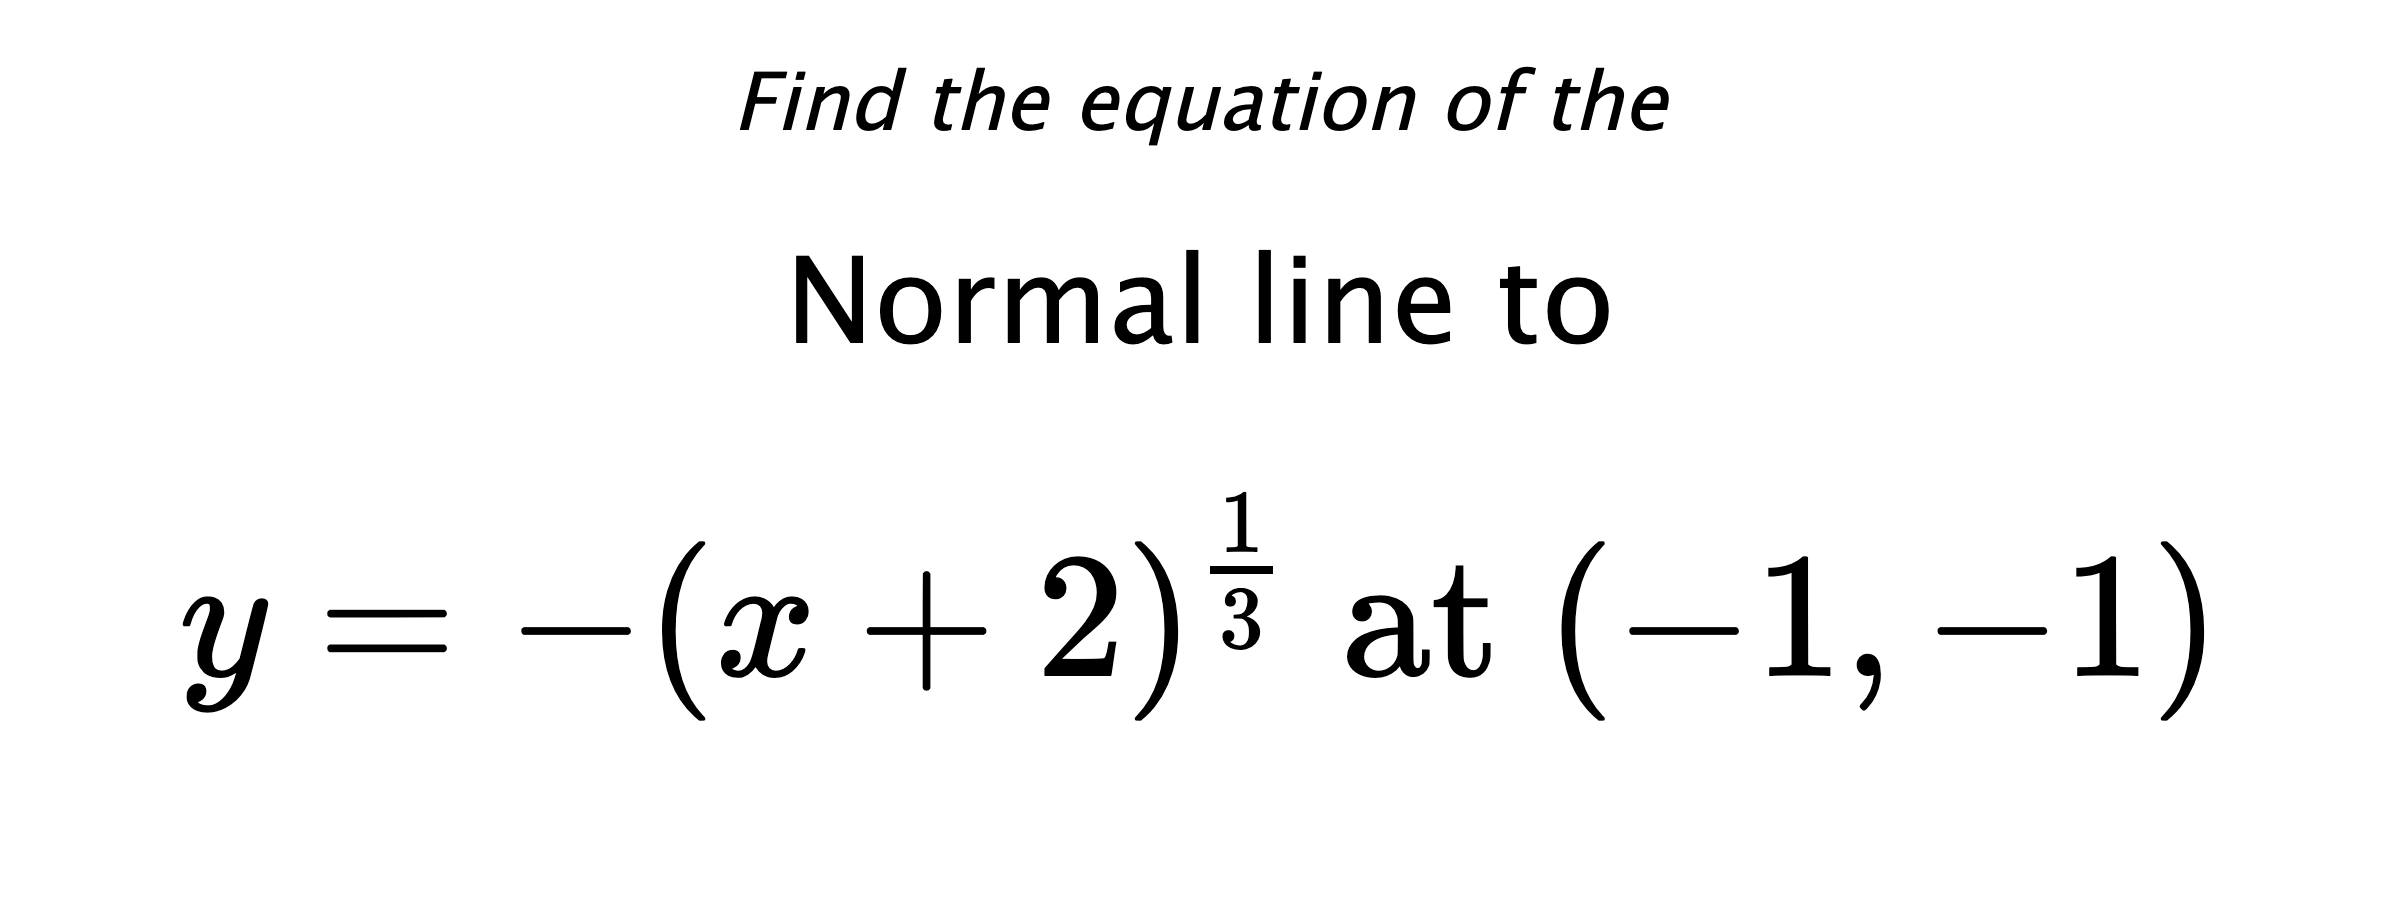 Find the equation of the Normal line to $$ y=-(x+2)^{\frac{1}{3}} \text{ at } (-1,-1) $$